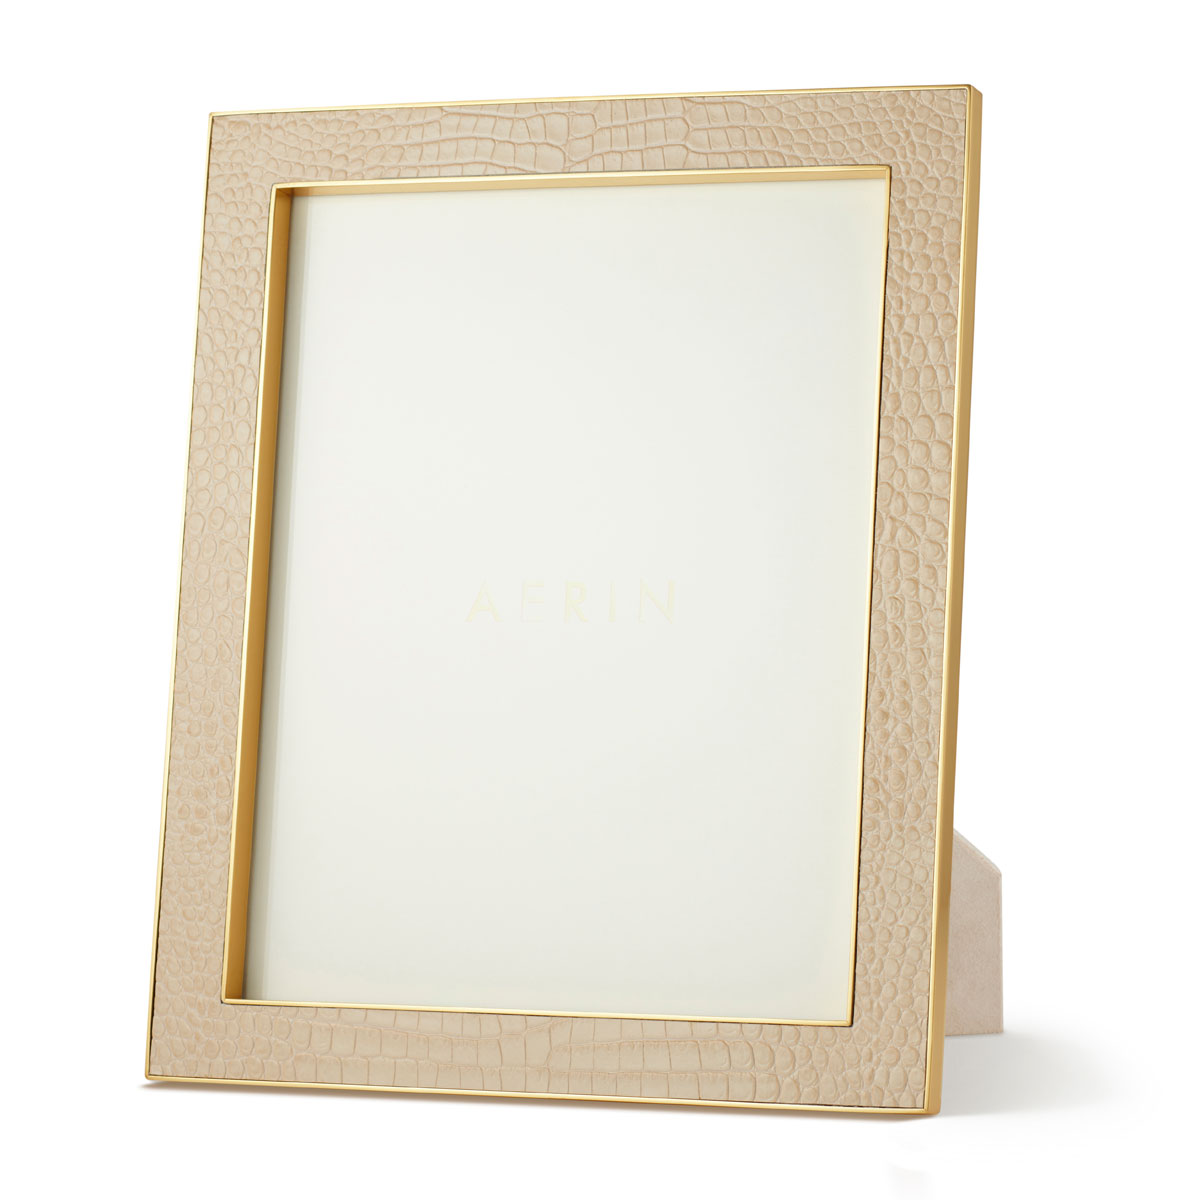 Aerin Classic Croc Leather 8x10" Picture Frame, Fawn